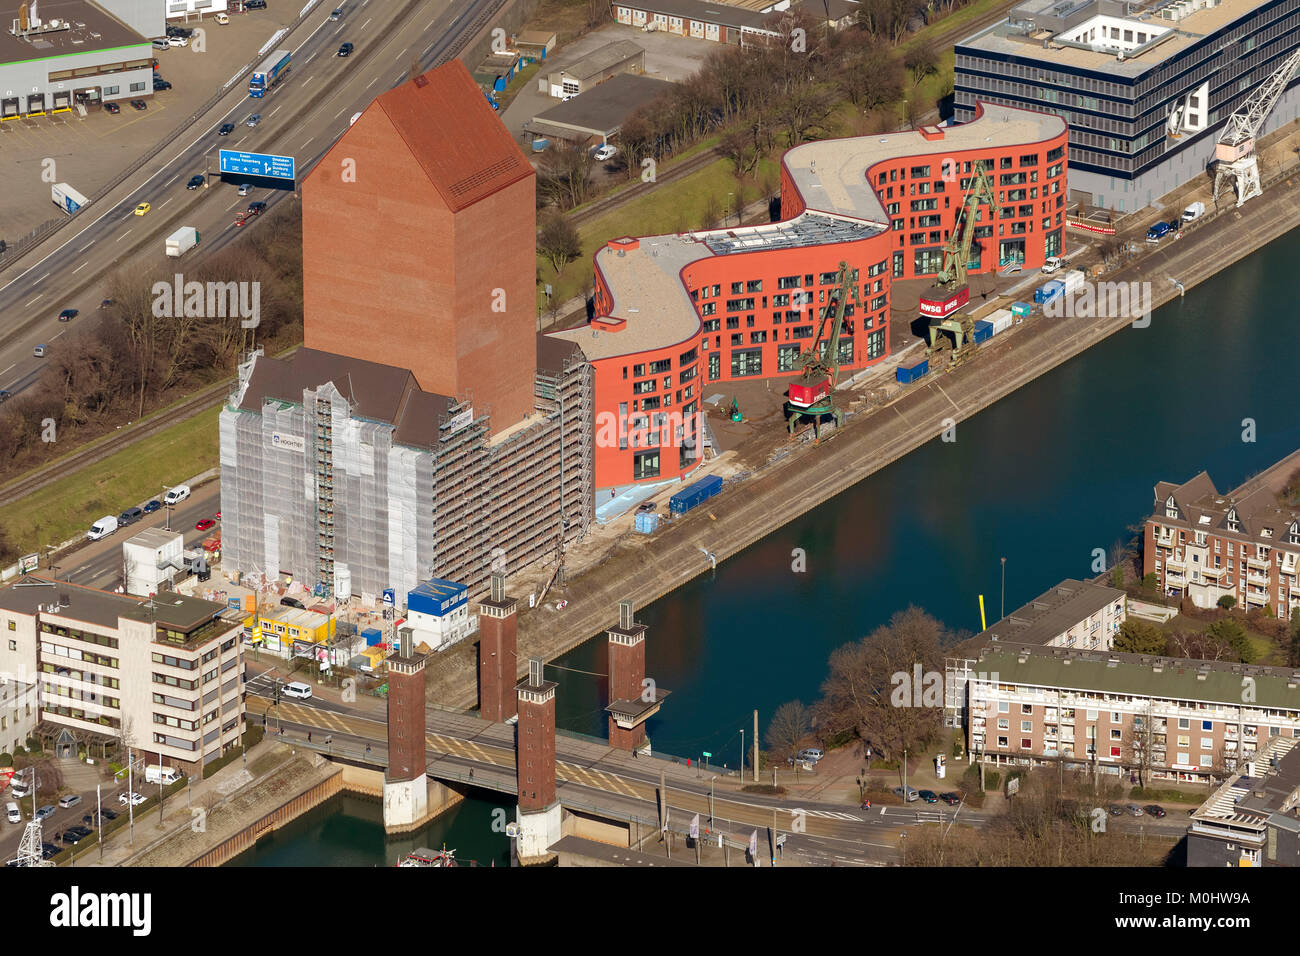 Aerial view, NRW State Archive at the Inner Harbor, Duisburg Center, Inner Harbor, Duisburg, Ruhr, Nordrhein-Westfalen, Germany, Europe, Duisburg, Ruh Stock Photo